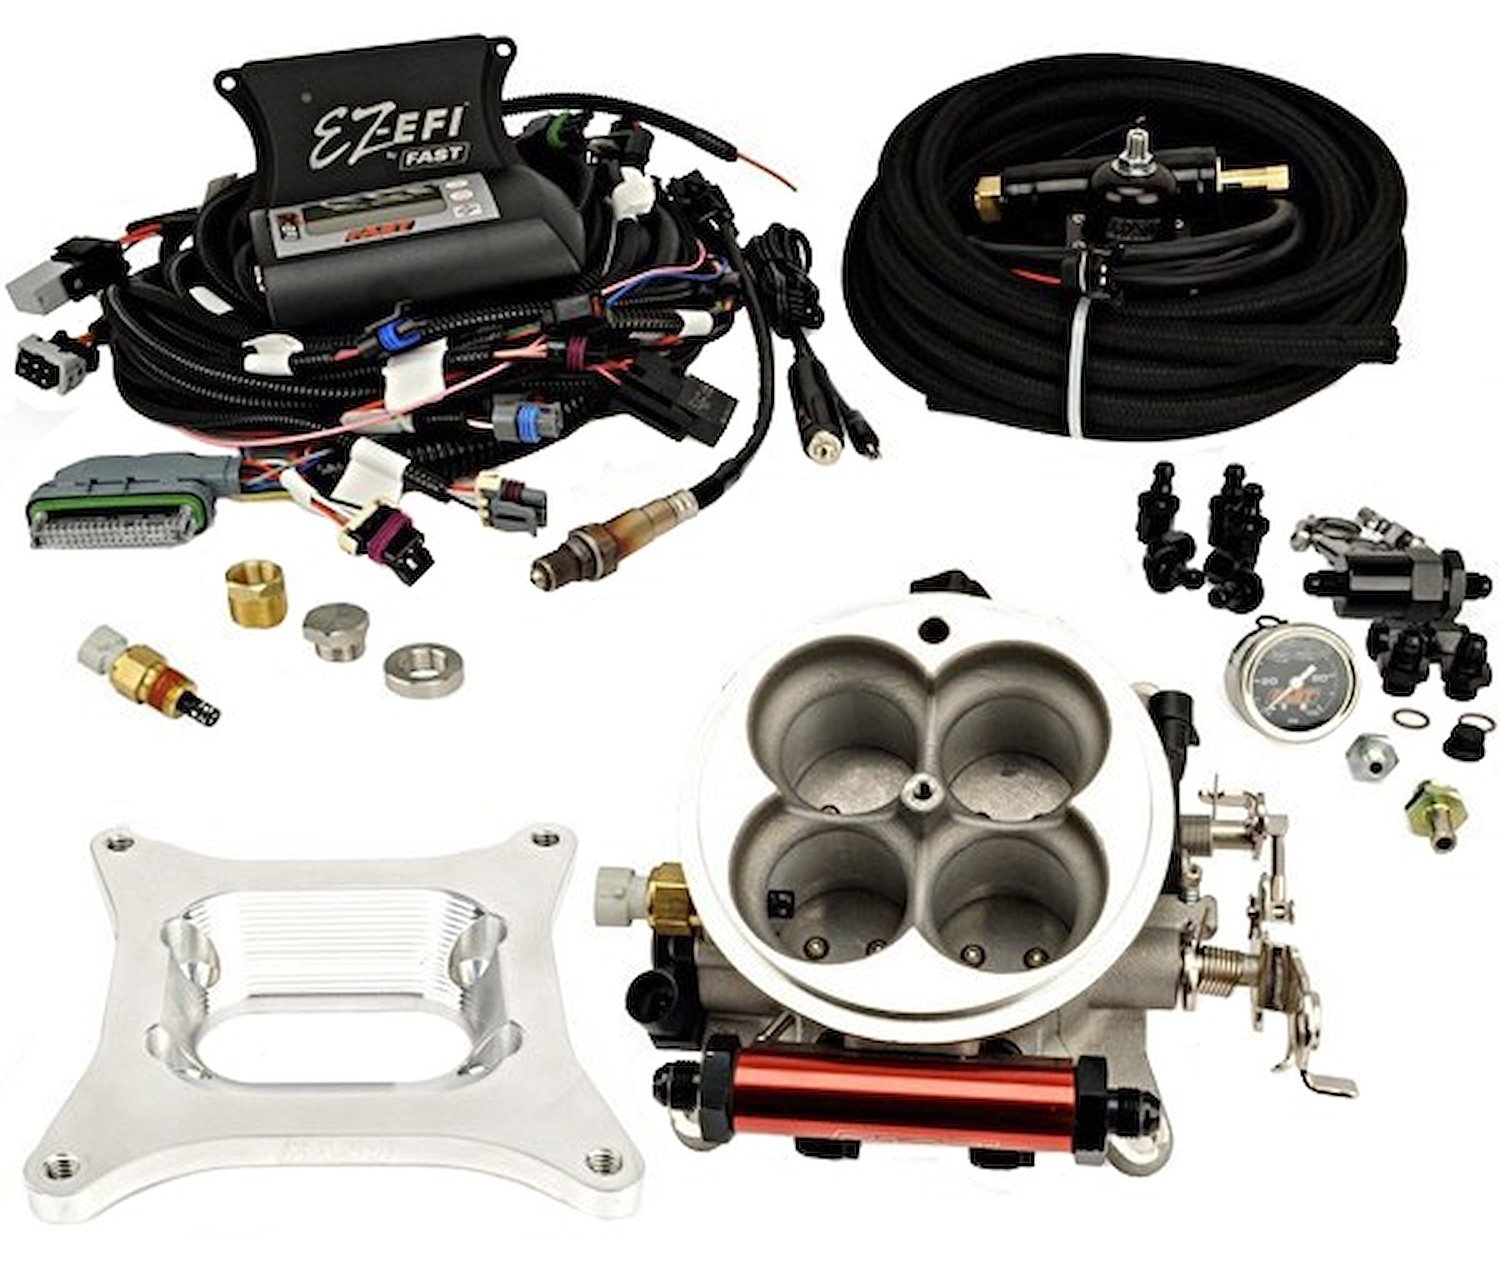 EZ-EFI Self-Tuning Fuel Injection System Master Kit with In-Tank Fuel Pump Kit